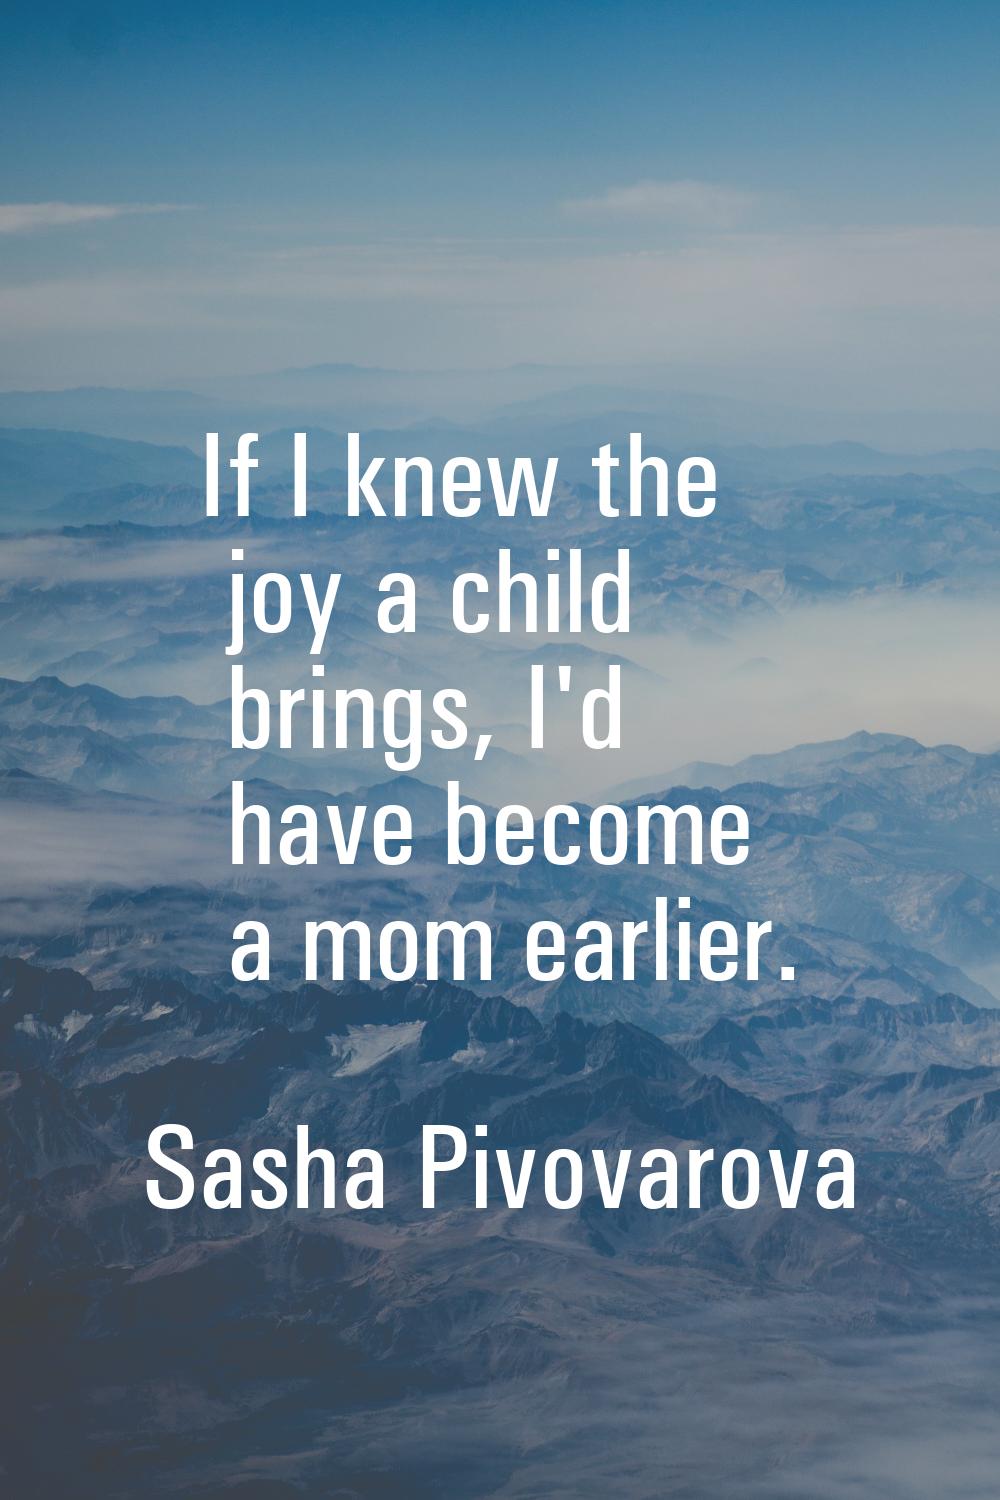 If I knew the joy a child brings, I'd have become a mom earlier.